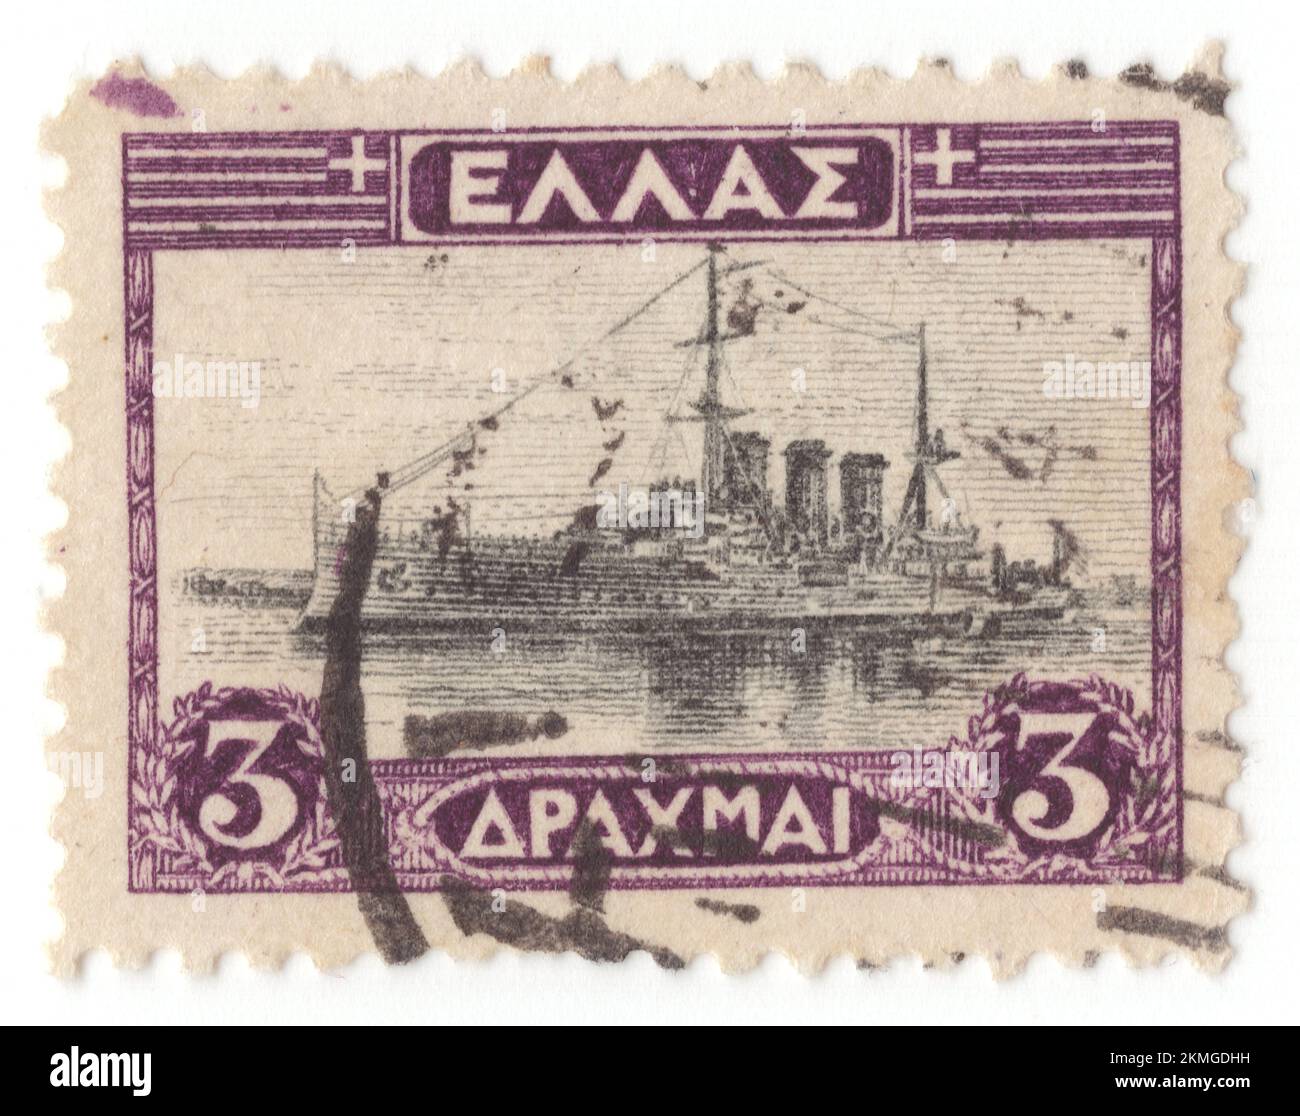 GREECE - 1927 April 1: An 3 drachma deep violet and black postage stamp depicting Cruiser “Georgios Averoff”, is a modified Pisa-class armored cruiser built in Italy for the Royal Hellenic Navy in the first decade of the 20th century. The ship served as the Greek flagship during most of the first half of the century. Although popularly known as a battleship in Greek, she is in fact an armored cruiser, the only ship of this type still in existence. The ship was initially ordered by the Italian Regia Marina, but budgetary constraints led Italy to offer it for sale to international customers Stock Photo